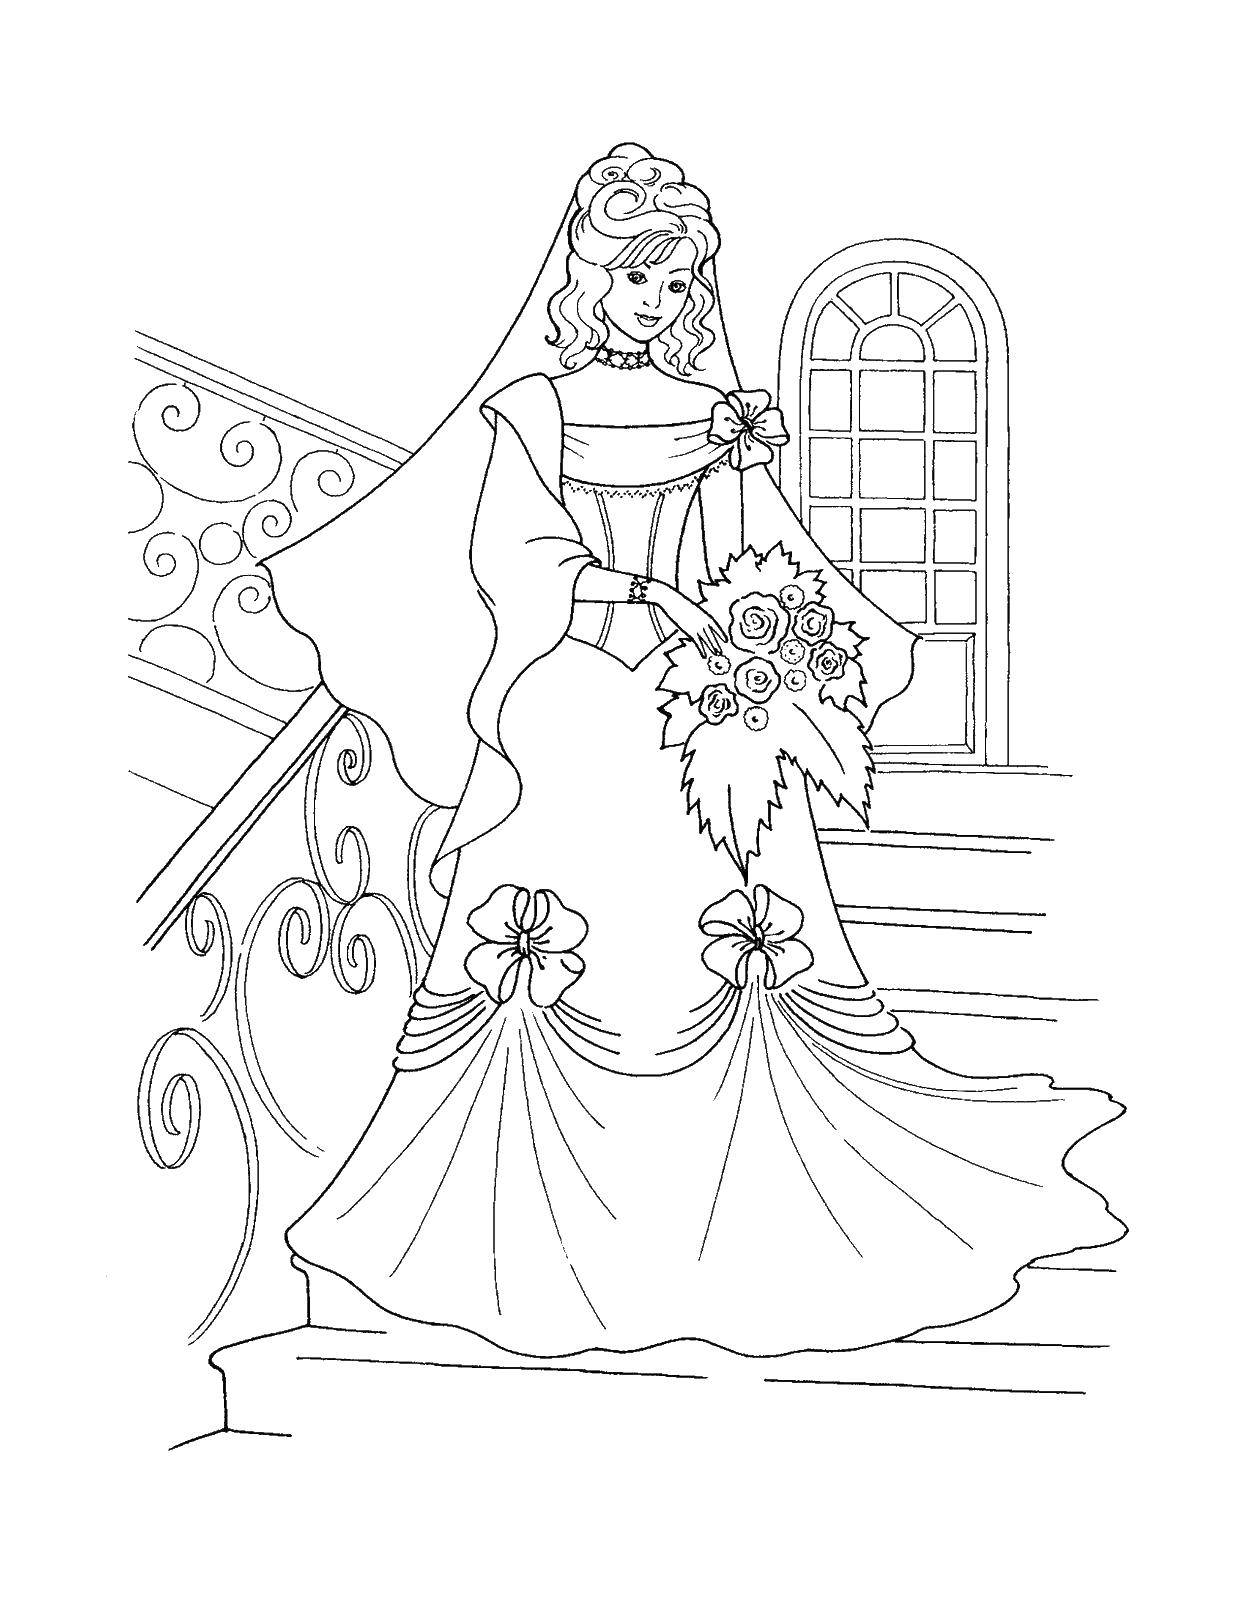 Coloring The bride on the stairs. Category Wedding. Tags:  wedding, bride, roses.